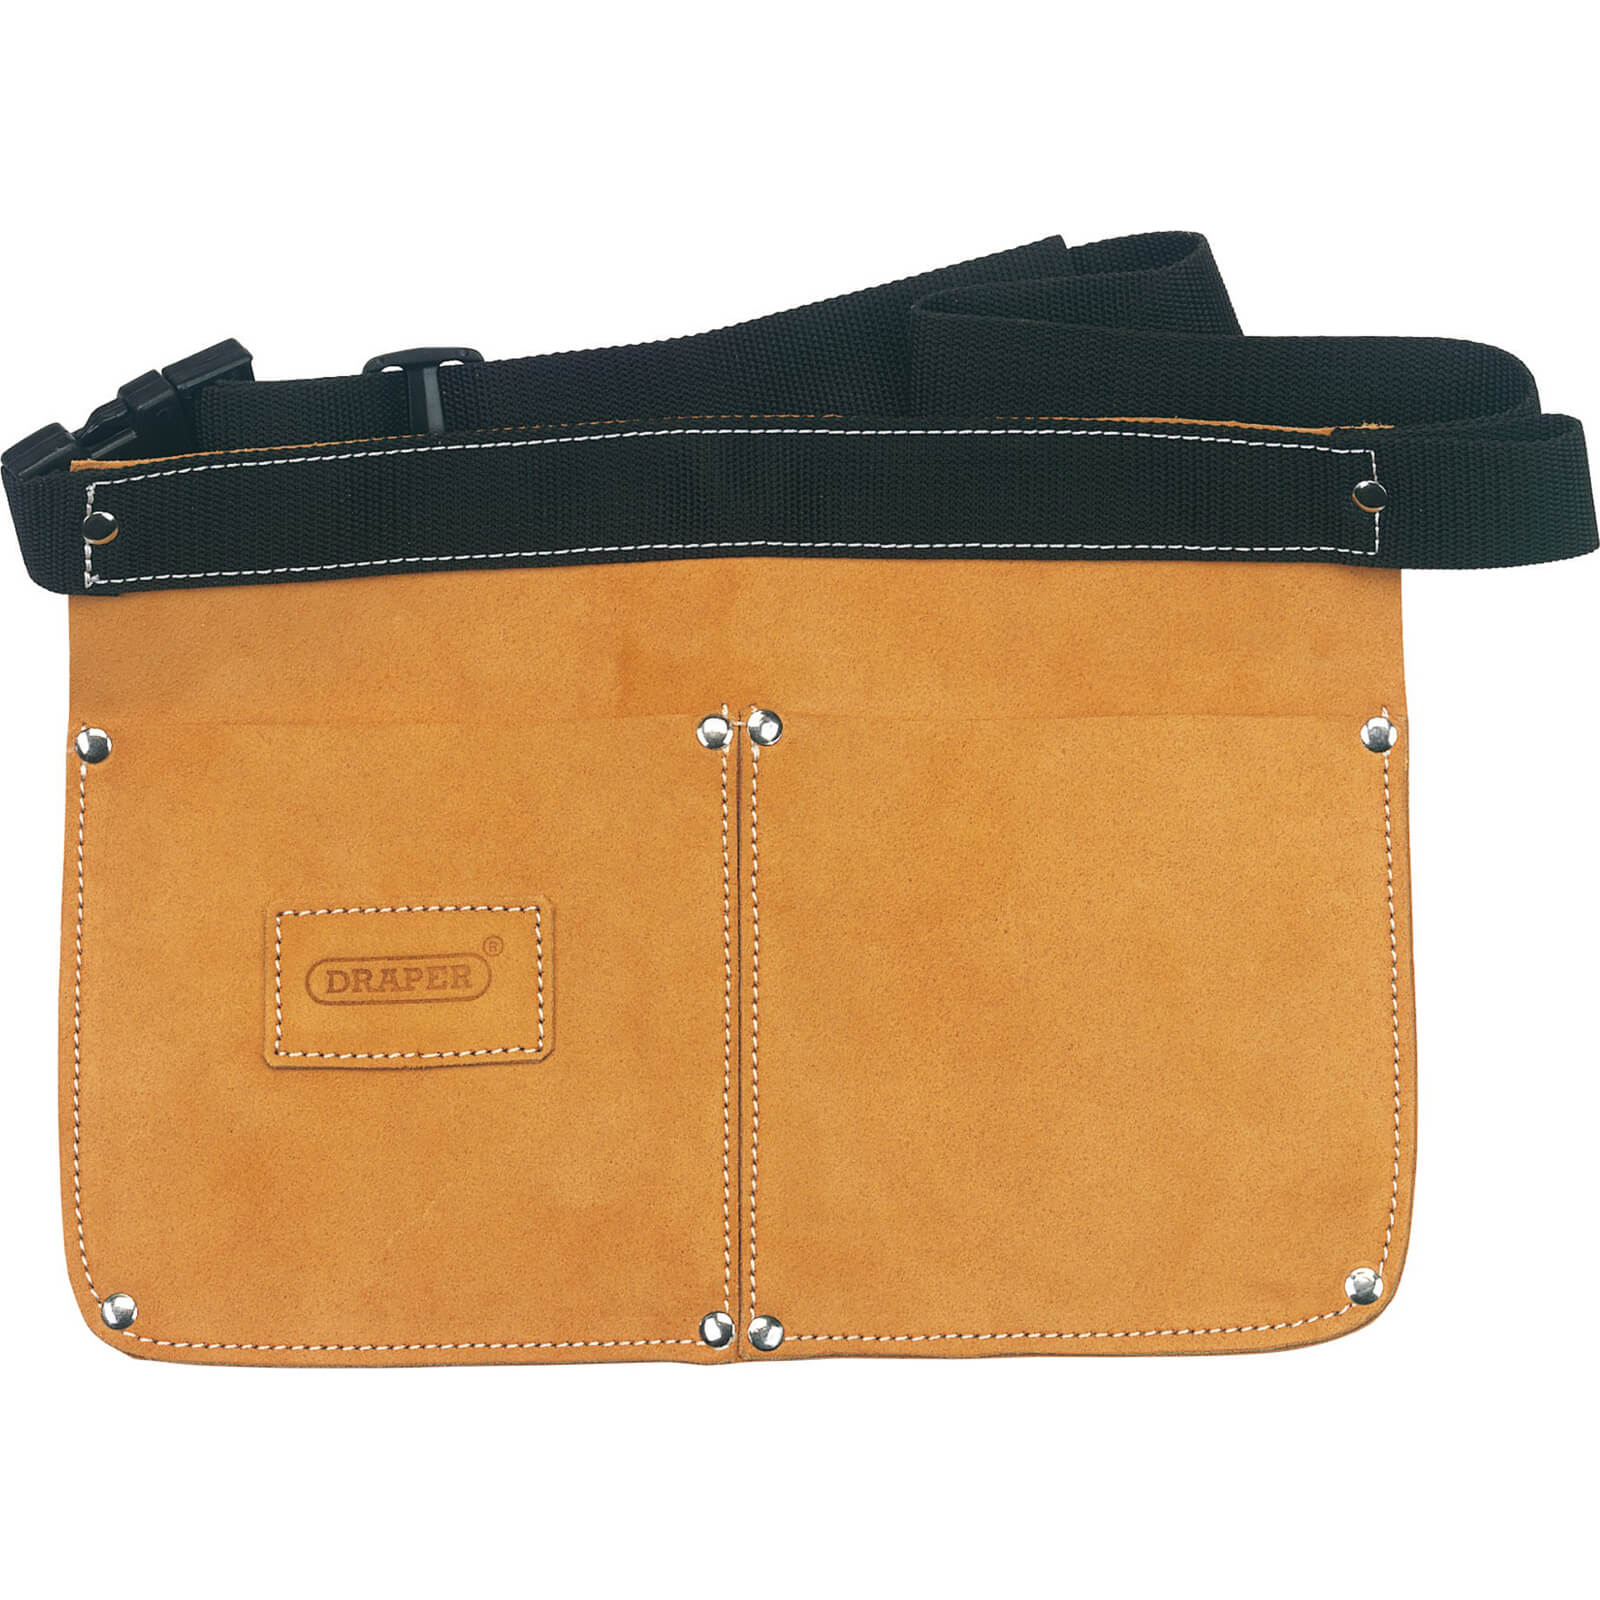 Photo of Draper Double Pocket Leather Nail Pouch